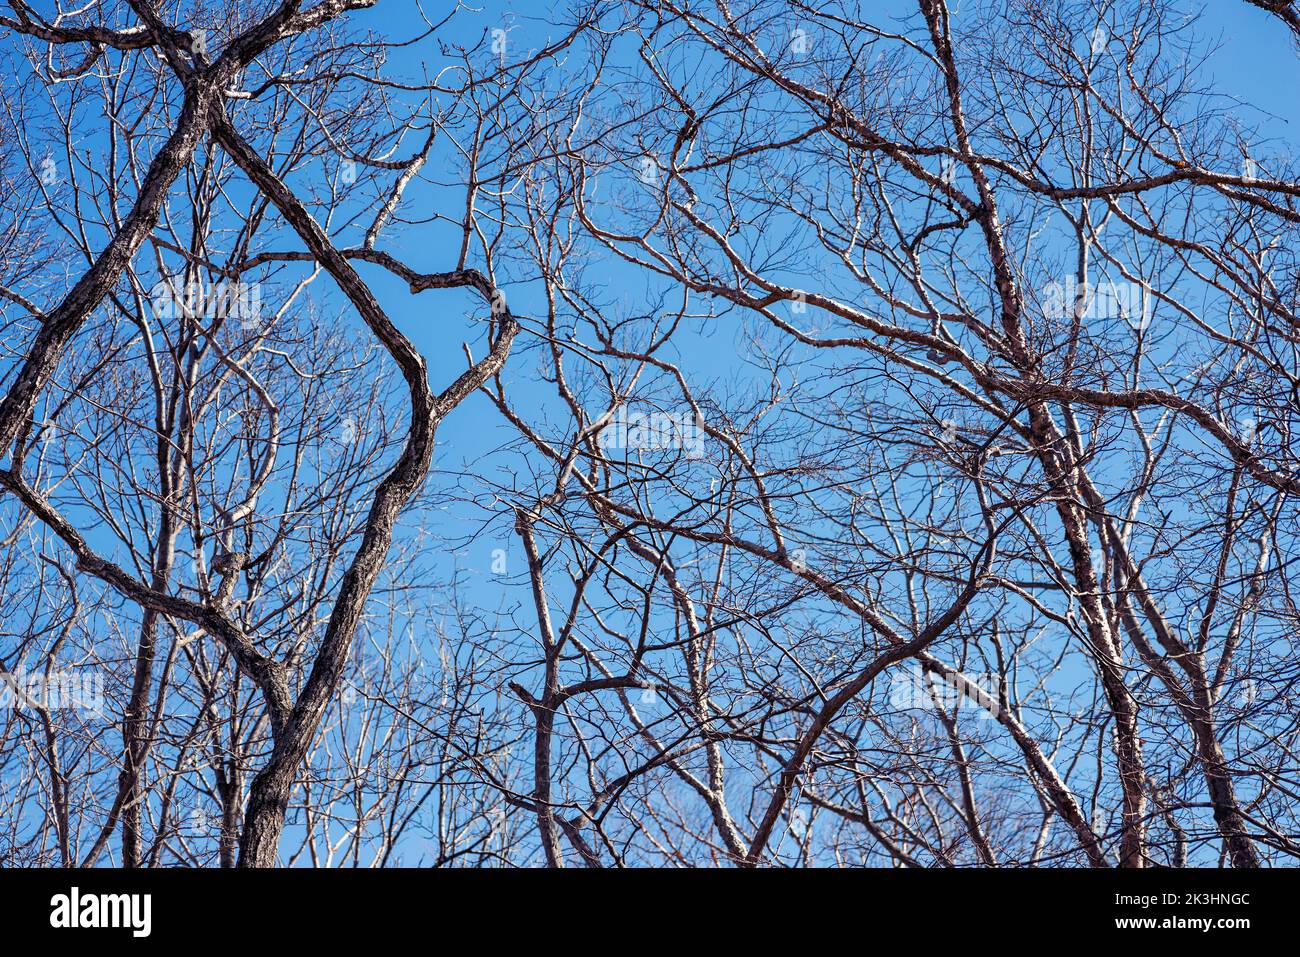 Tree branch silhouette over blue sky background. Stock Photo